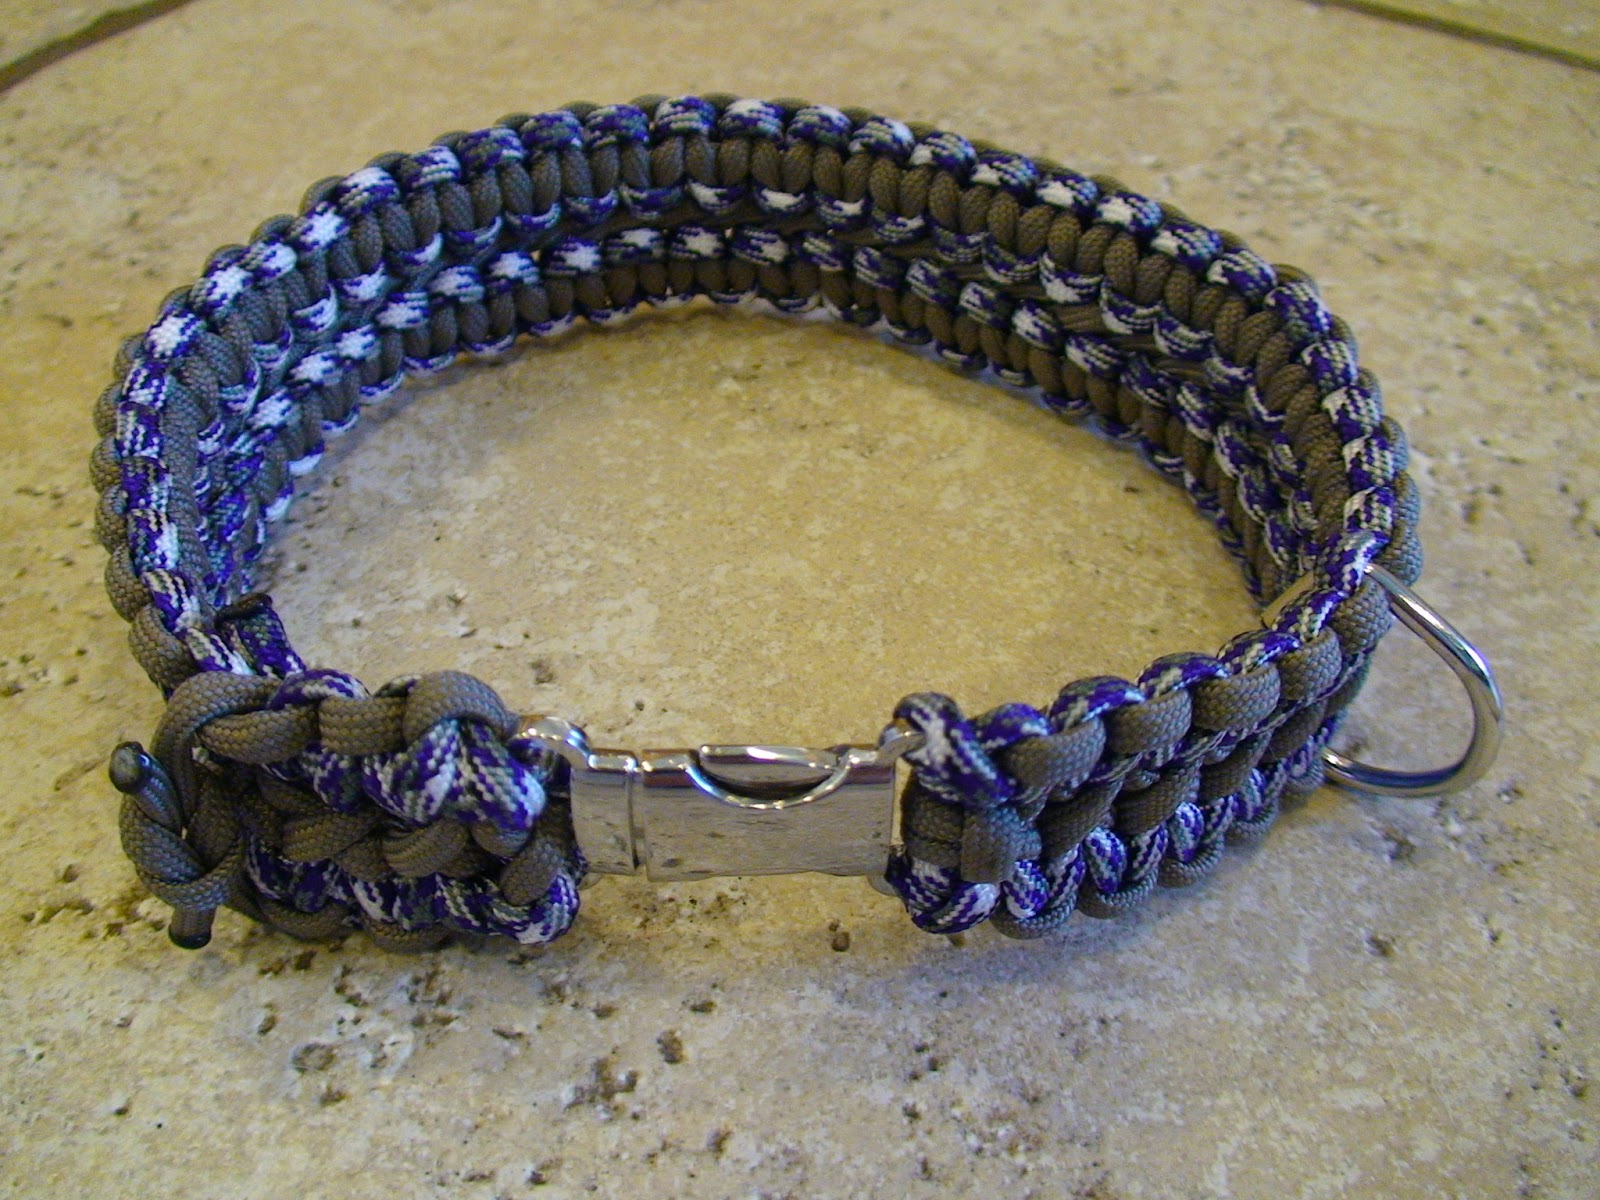 The Super Awesome Blog of Dogventuring: Homemade Paracord Dog Collars